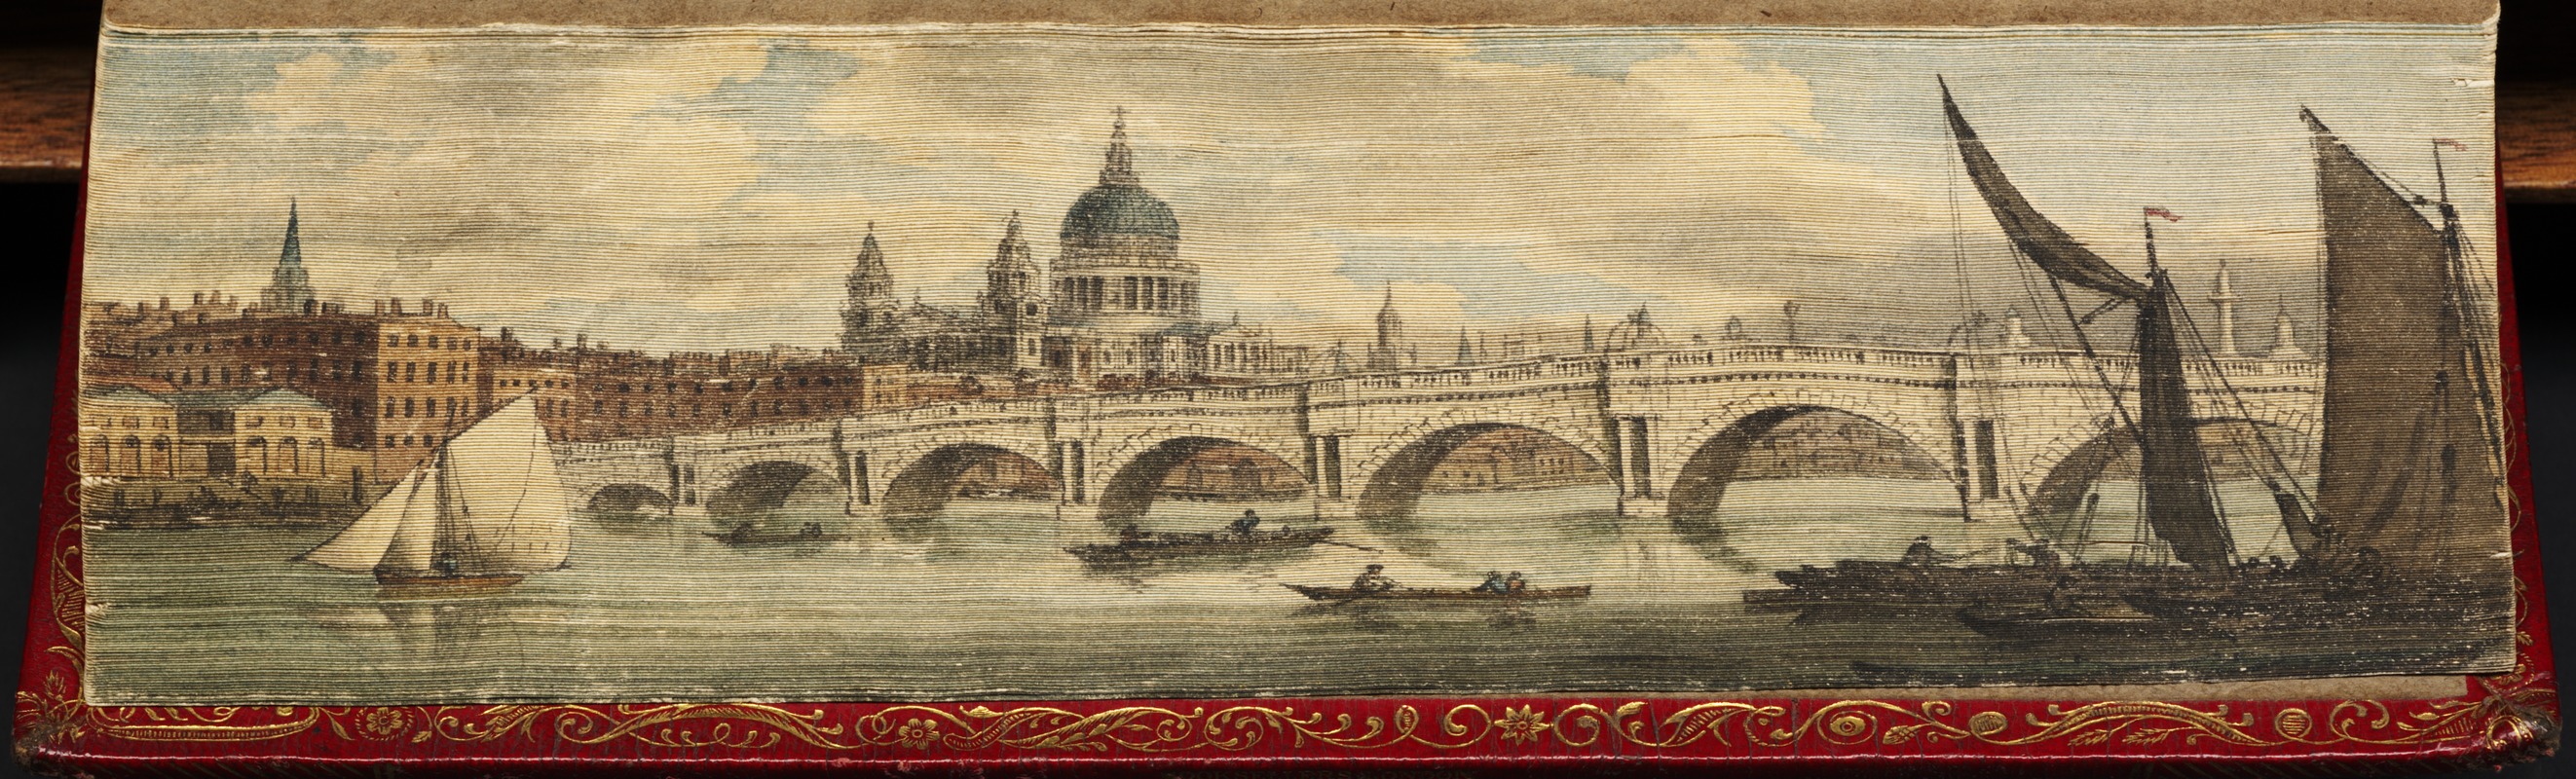 St. Paul’s Cathedral and London Bridge